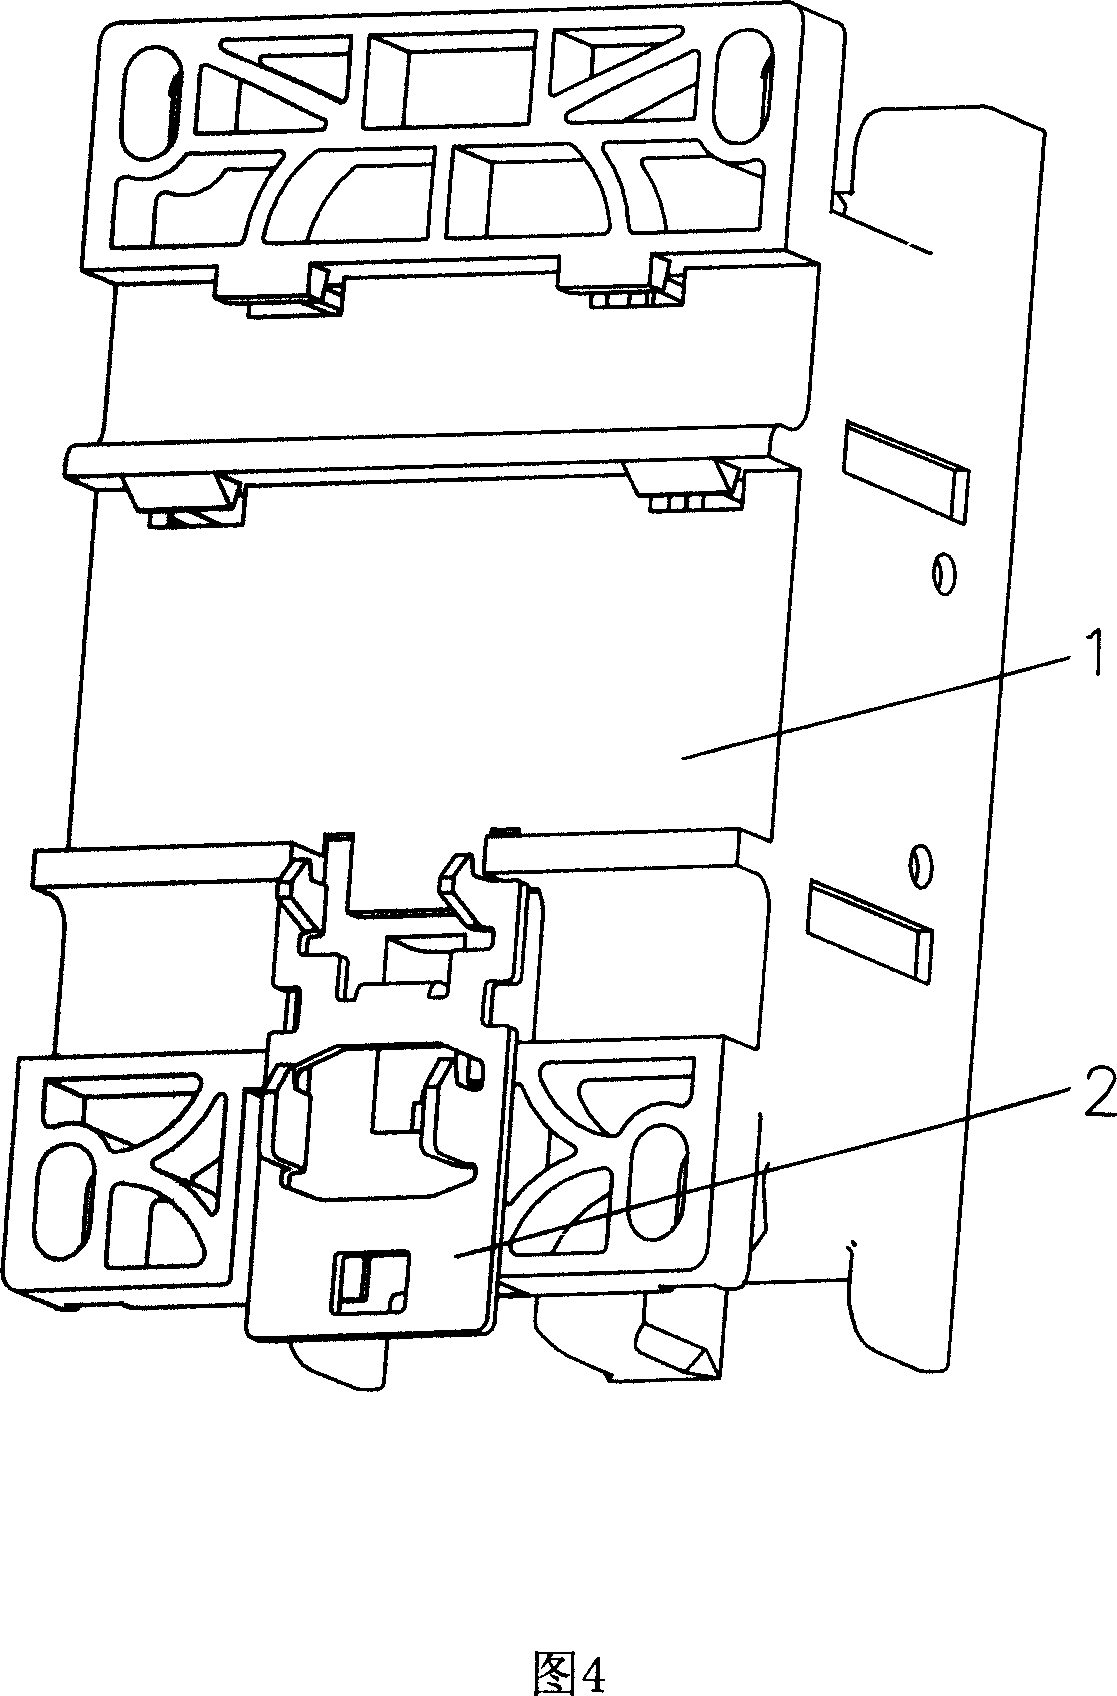 An installation device of the contactor